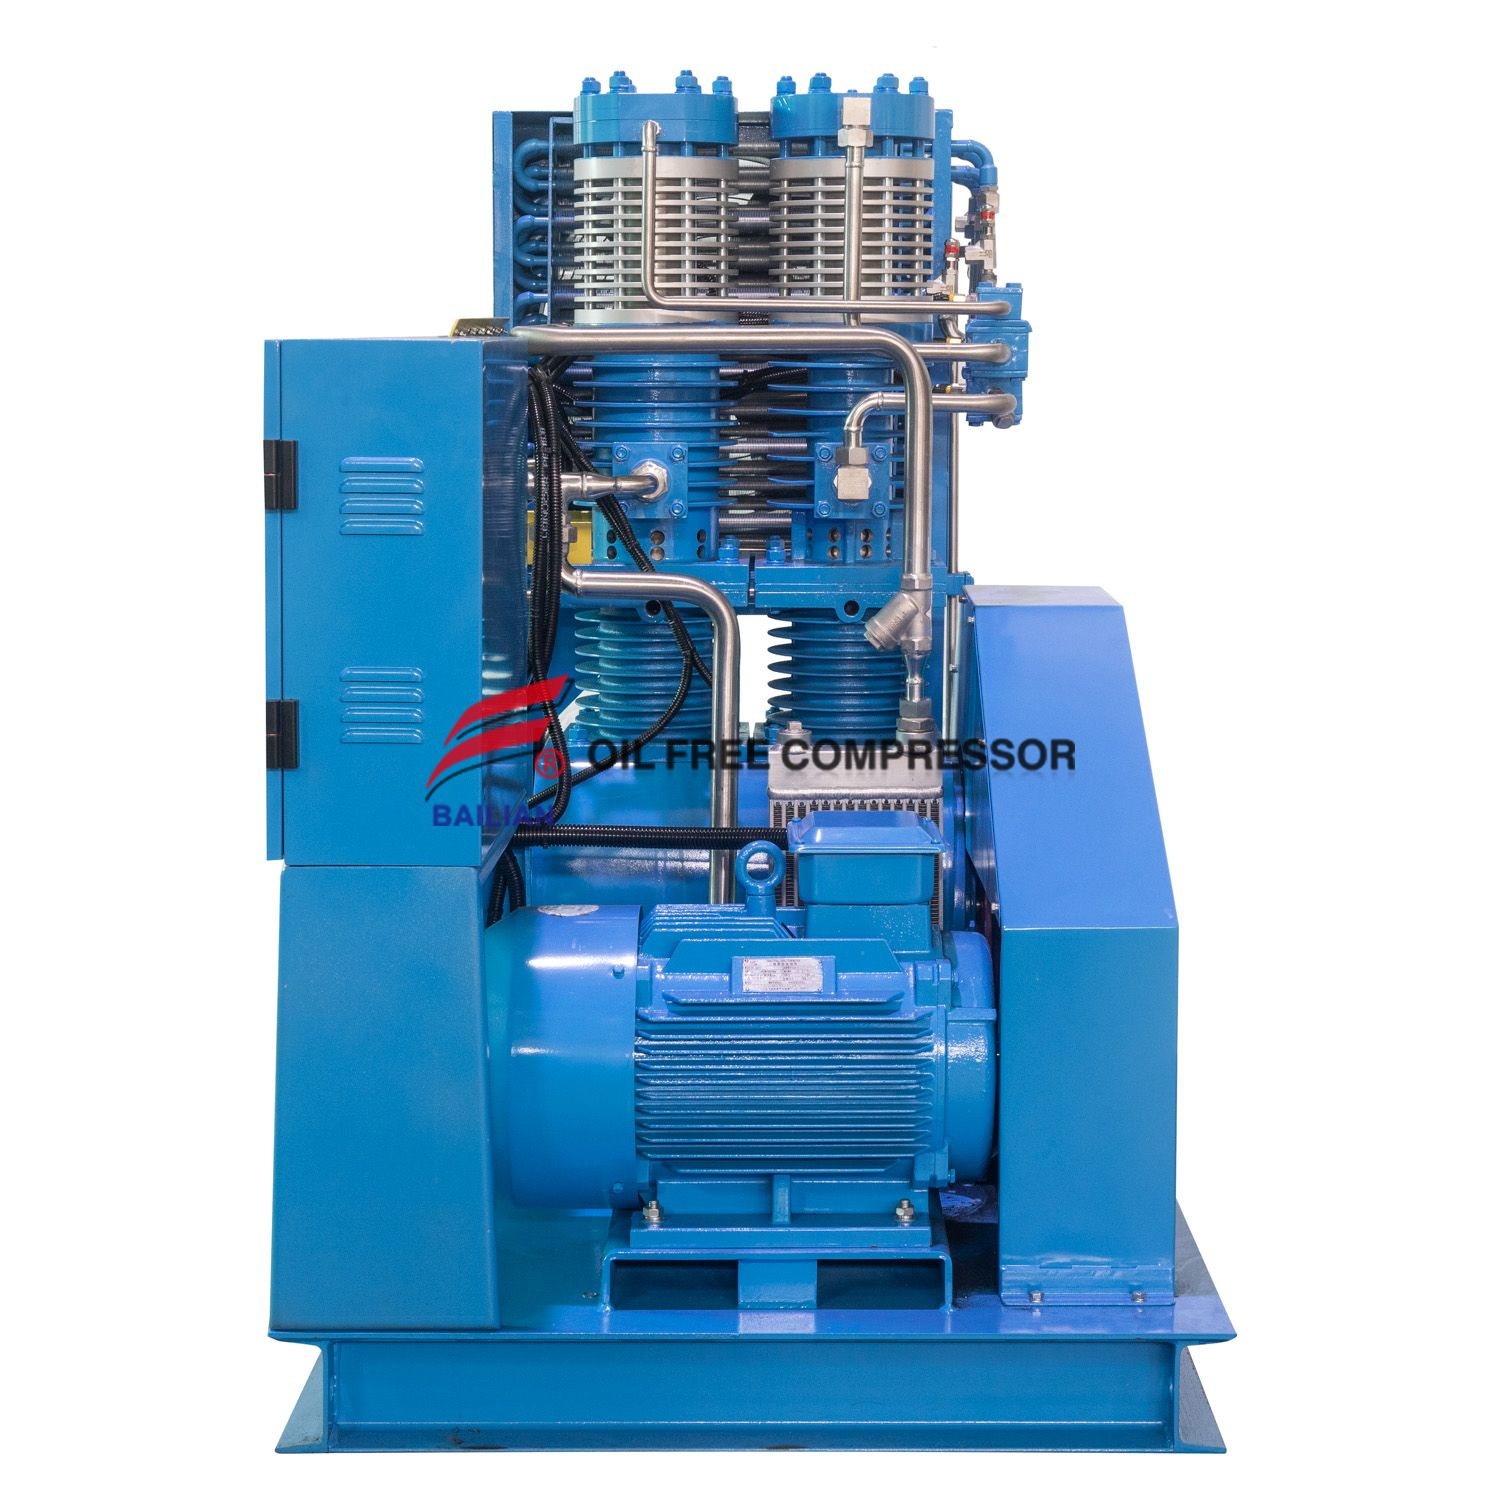 GOW-45/4-150 Totally High Pressure Oil Free Oxygen Compressor 